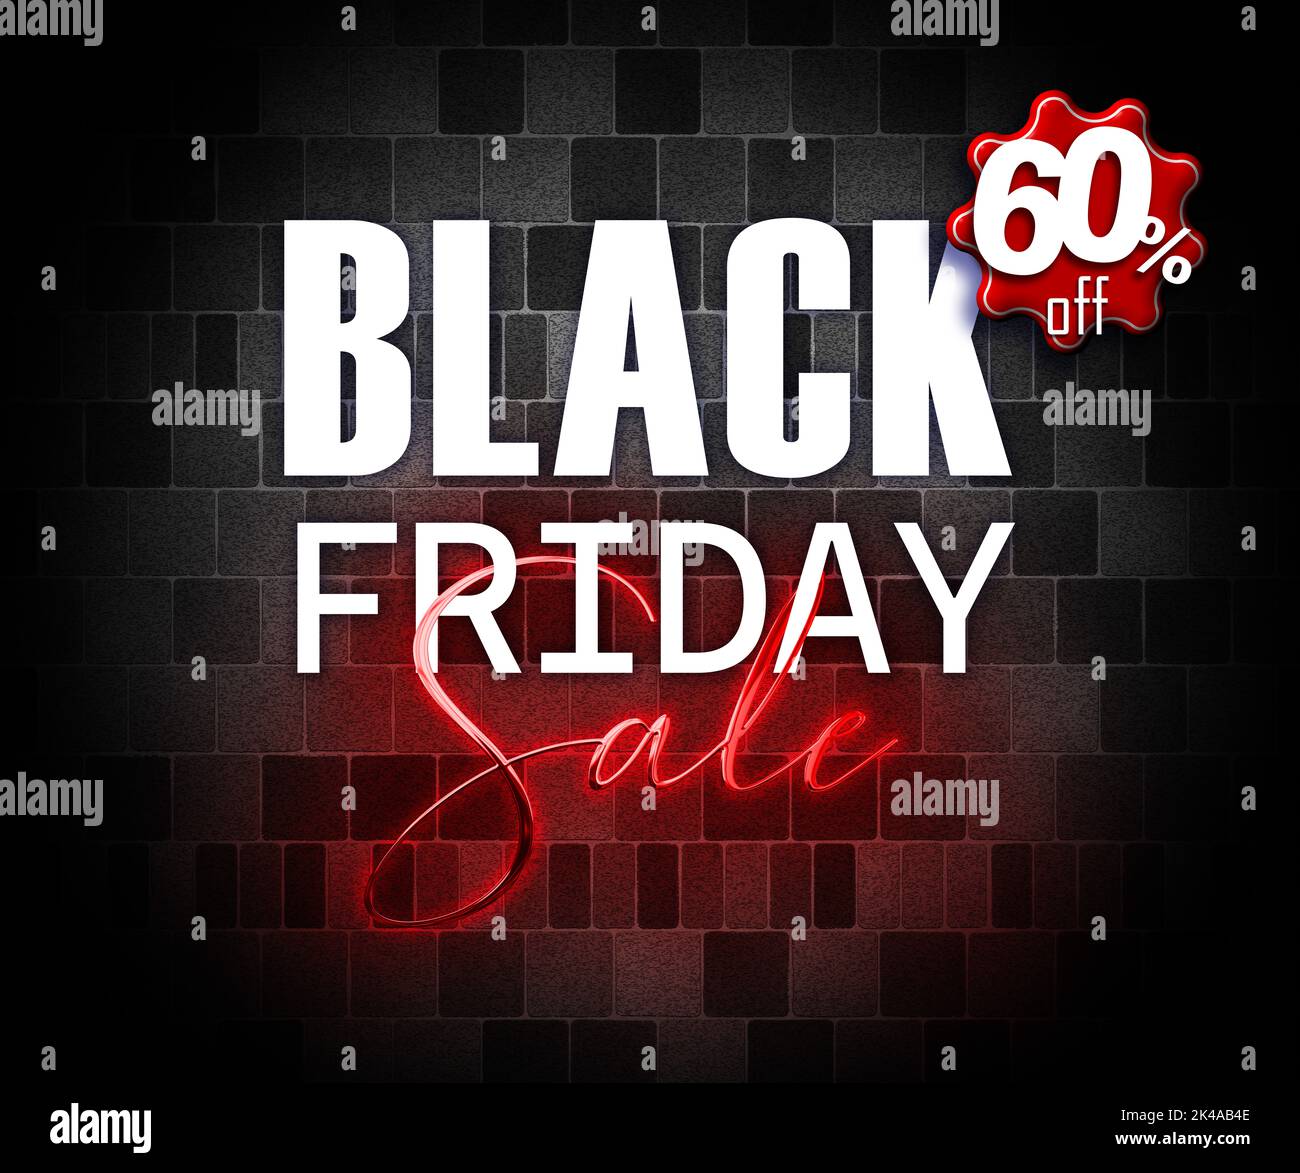 illustration with 3d elements black friday promotion banner 60 percent off sales increase Stock Photo